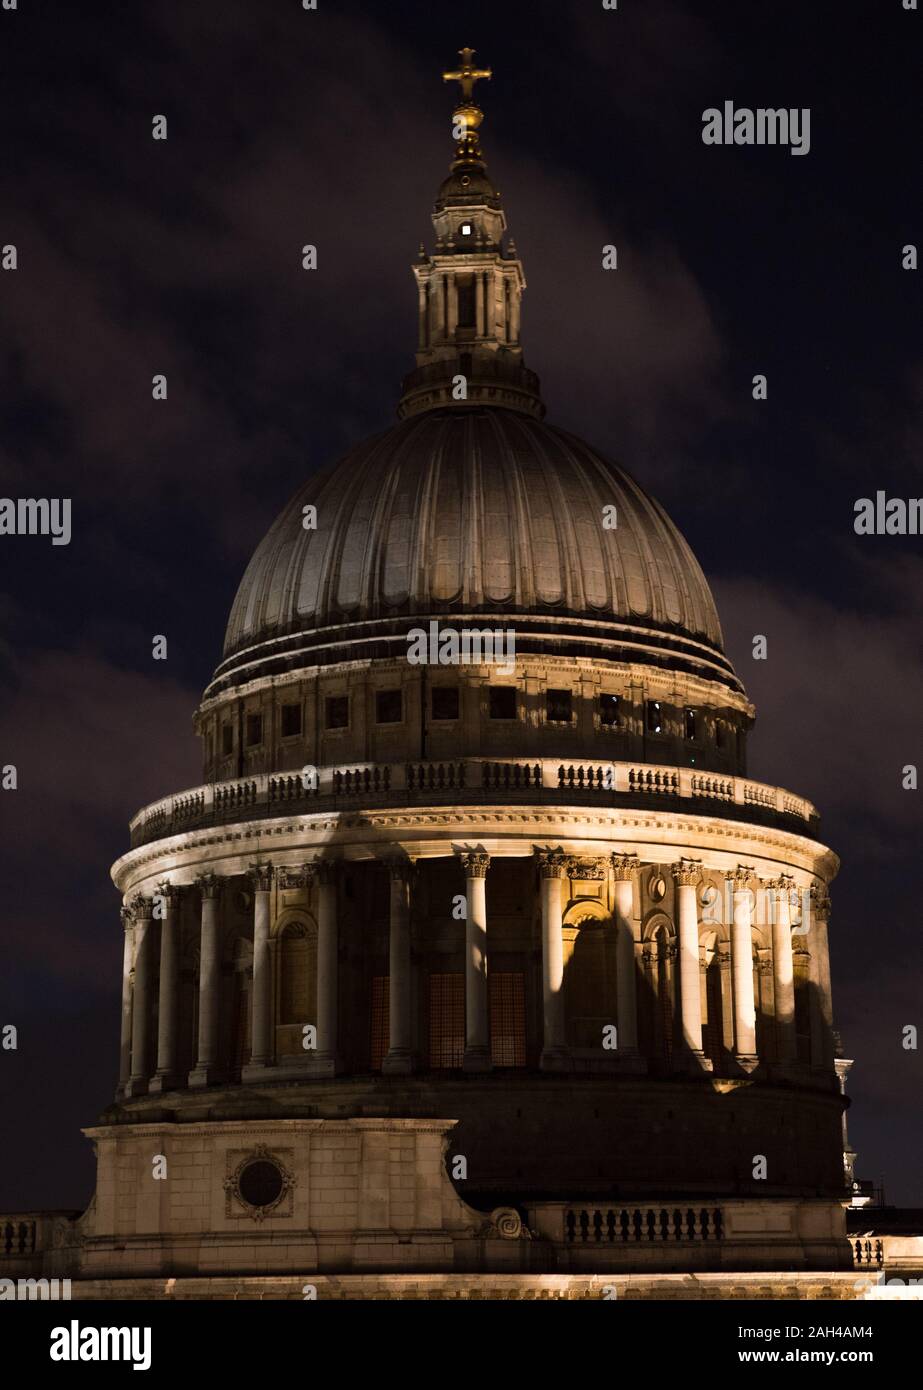 The Dome, St Paul's Cathedral, Night Time, London, Landscape, The City of London, England, UK, GB. Stock Photo